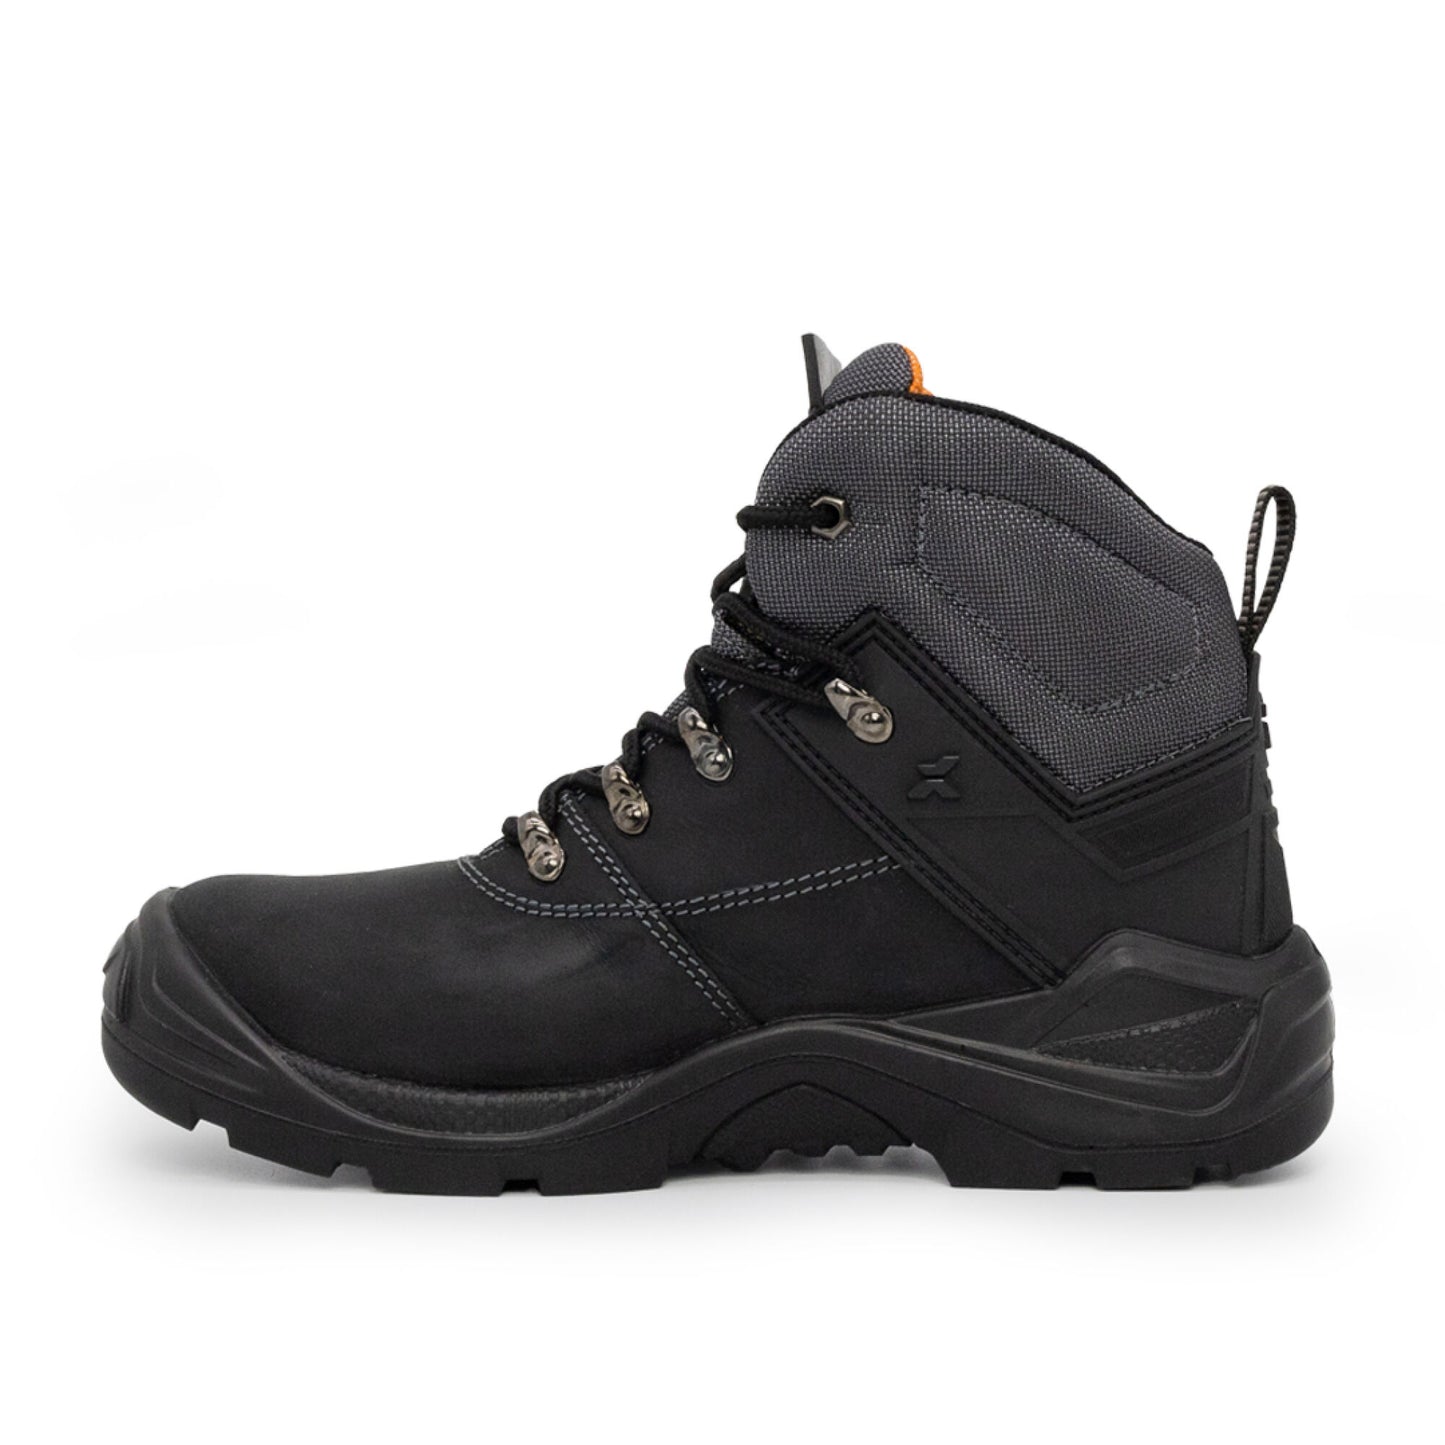 Xpert Warrior S3 Safety Laced Boot - Black